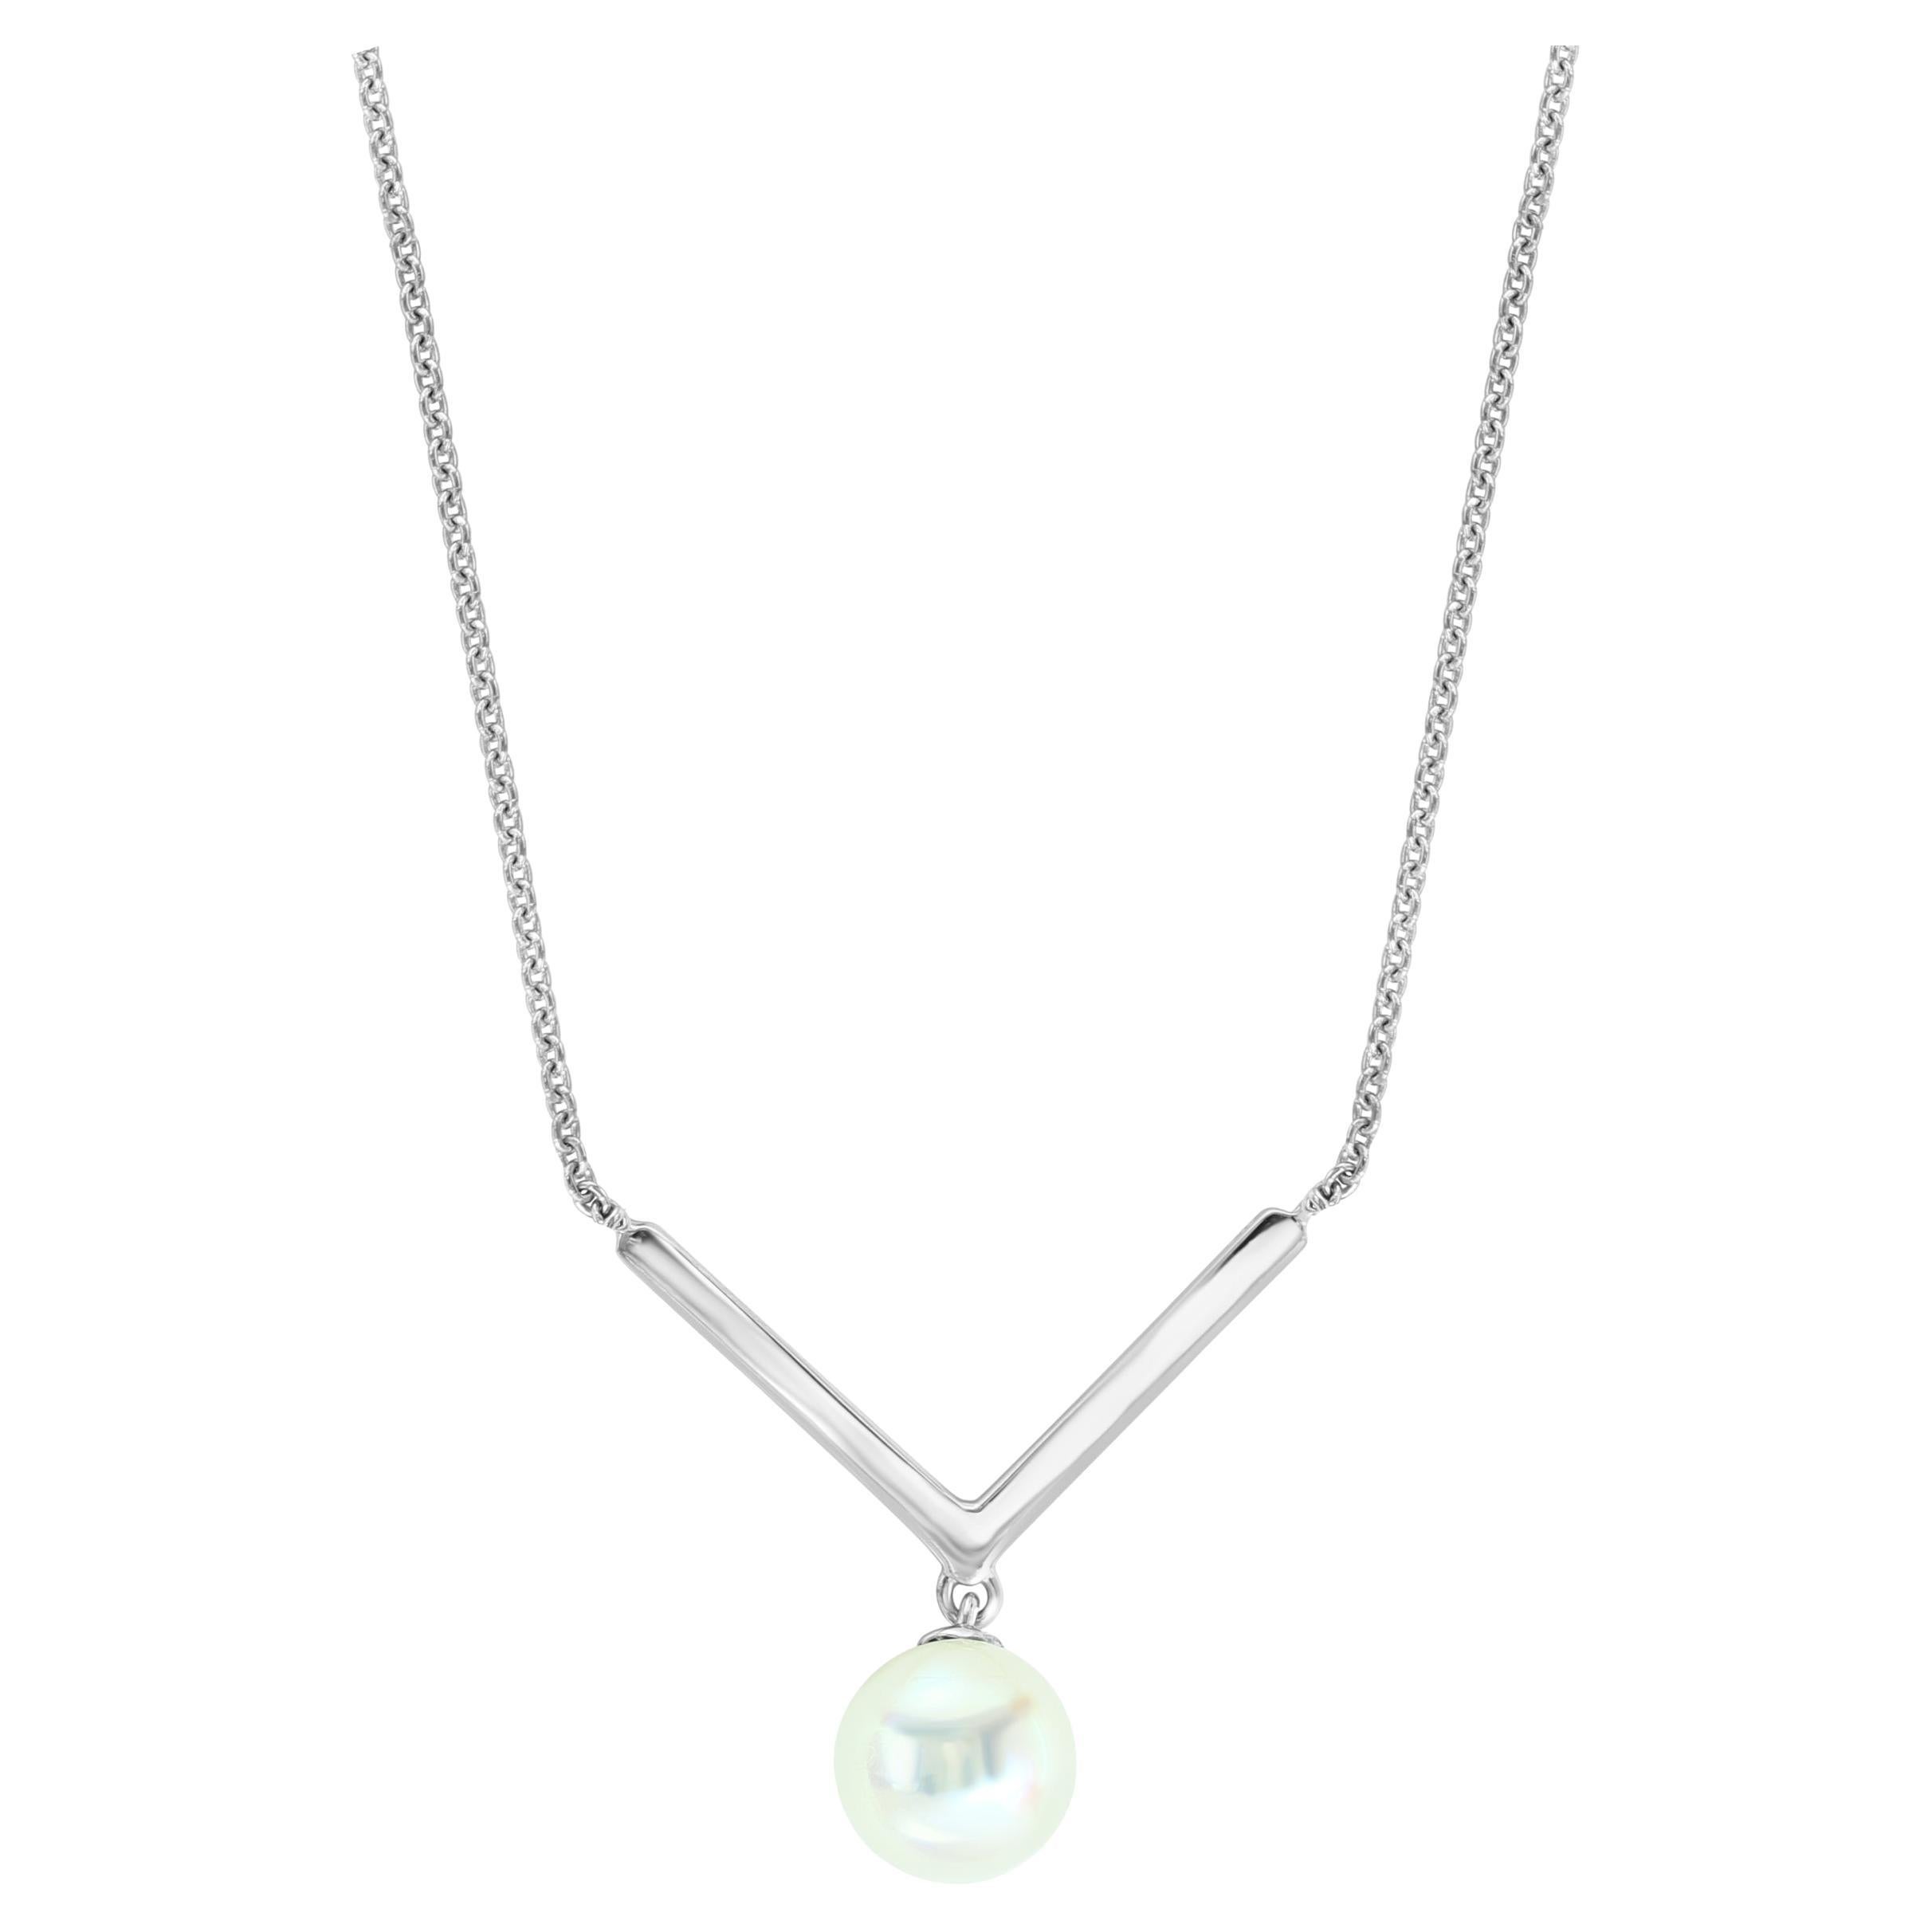 Chevron Pendant Necklace with Freshwater White Pearl .925 Sterling Silver For Sale